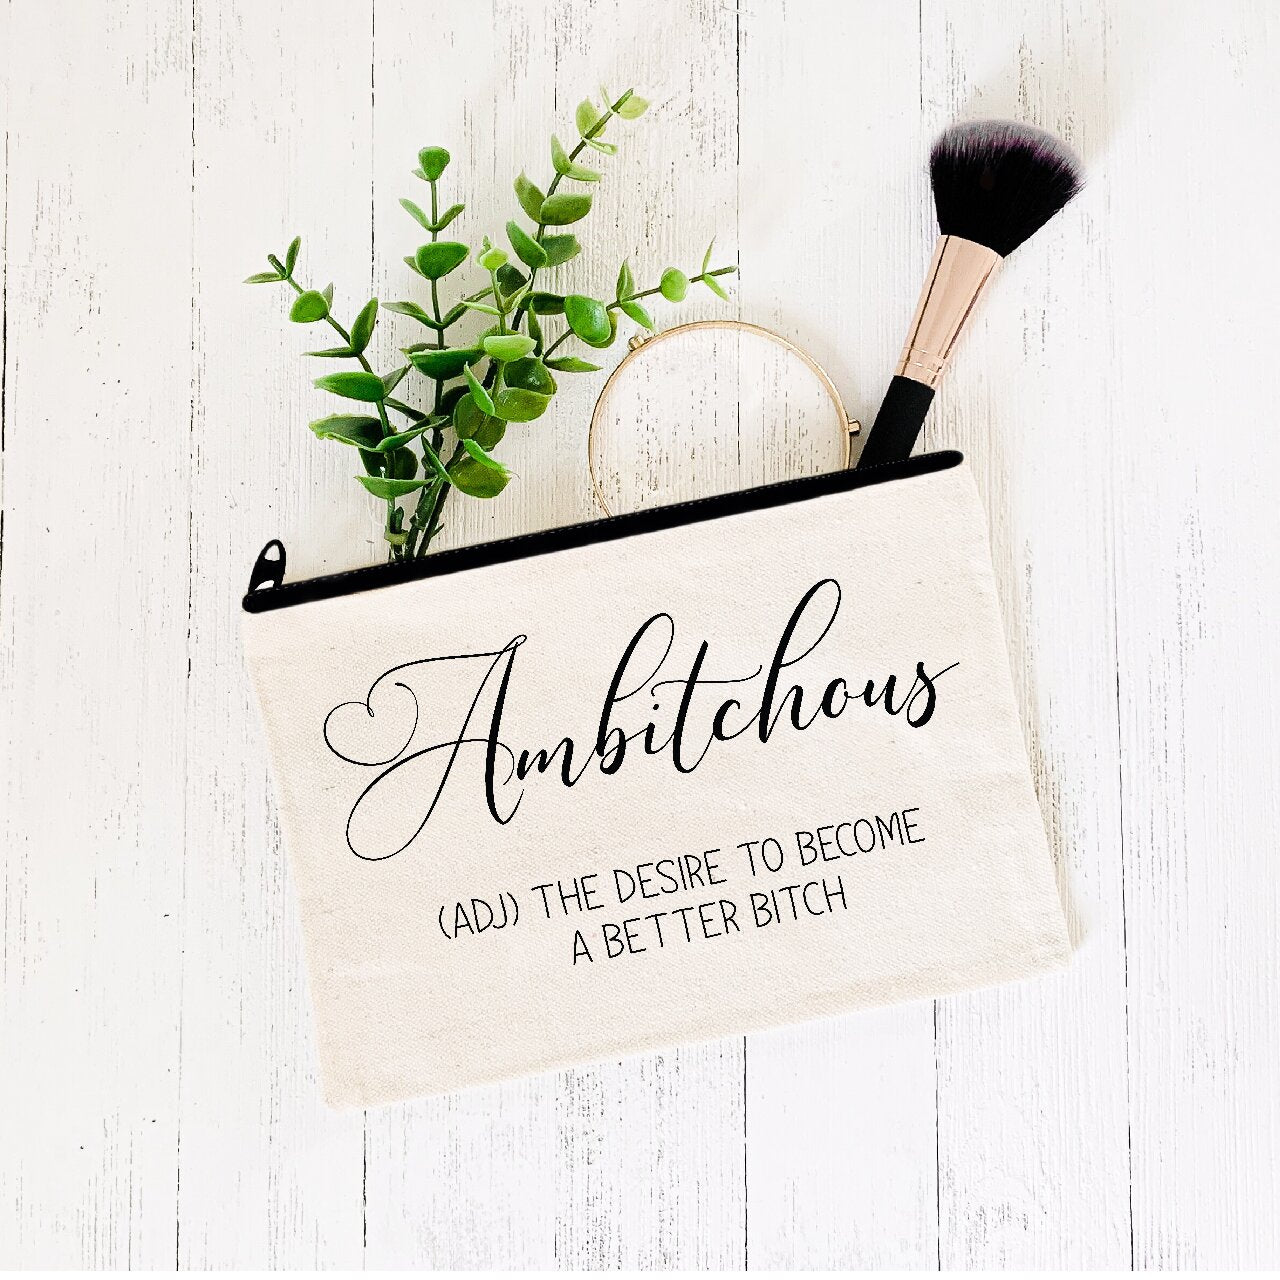 Ambitchous (ADJ) The Desire To Become A Better Bitch  - Make-Up Bag/Pencil Case